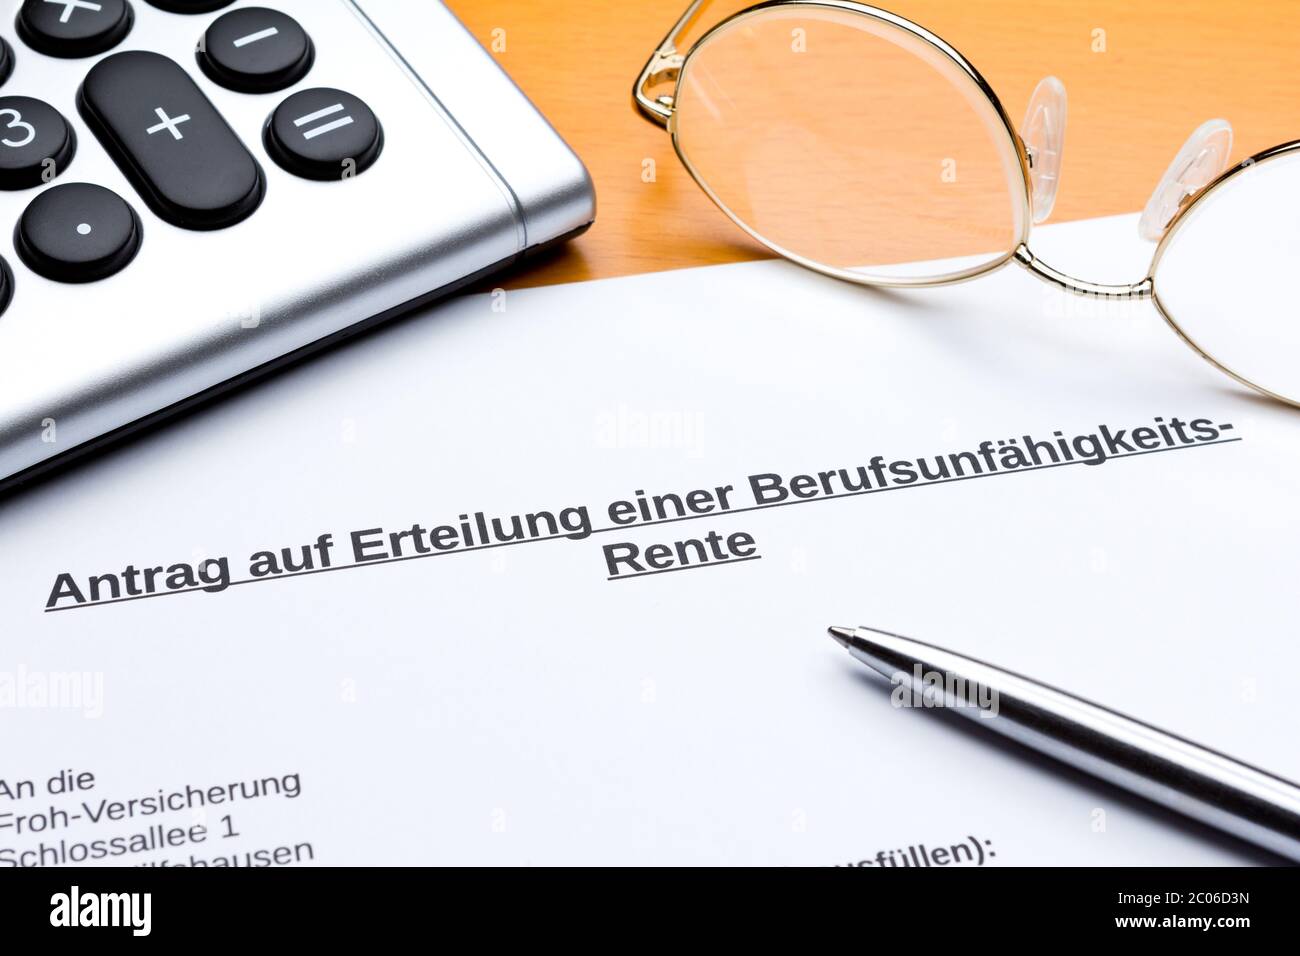 Request for occupational disability pension in germany: antrag berufsunfähigkeitsrente. Stock Photo